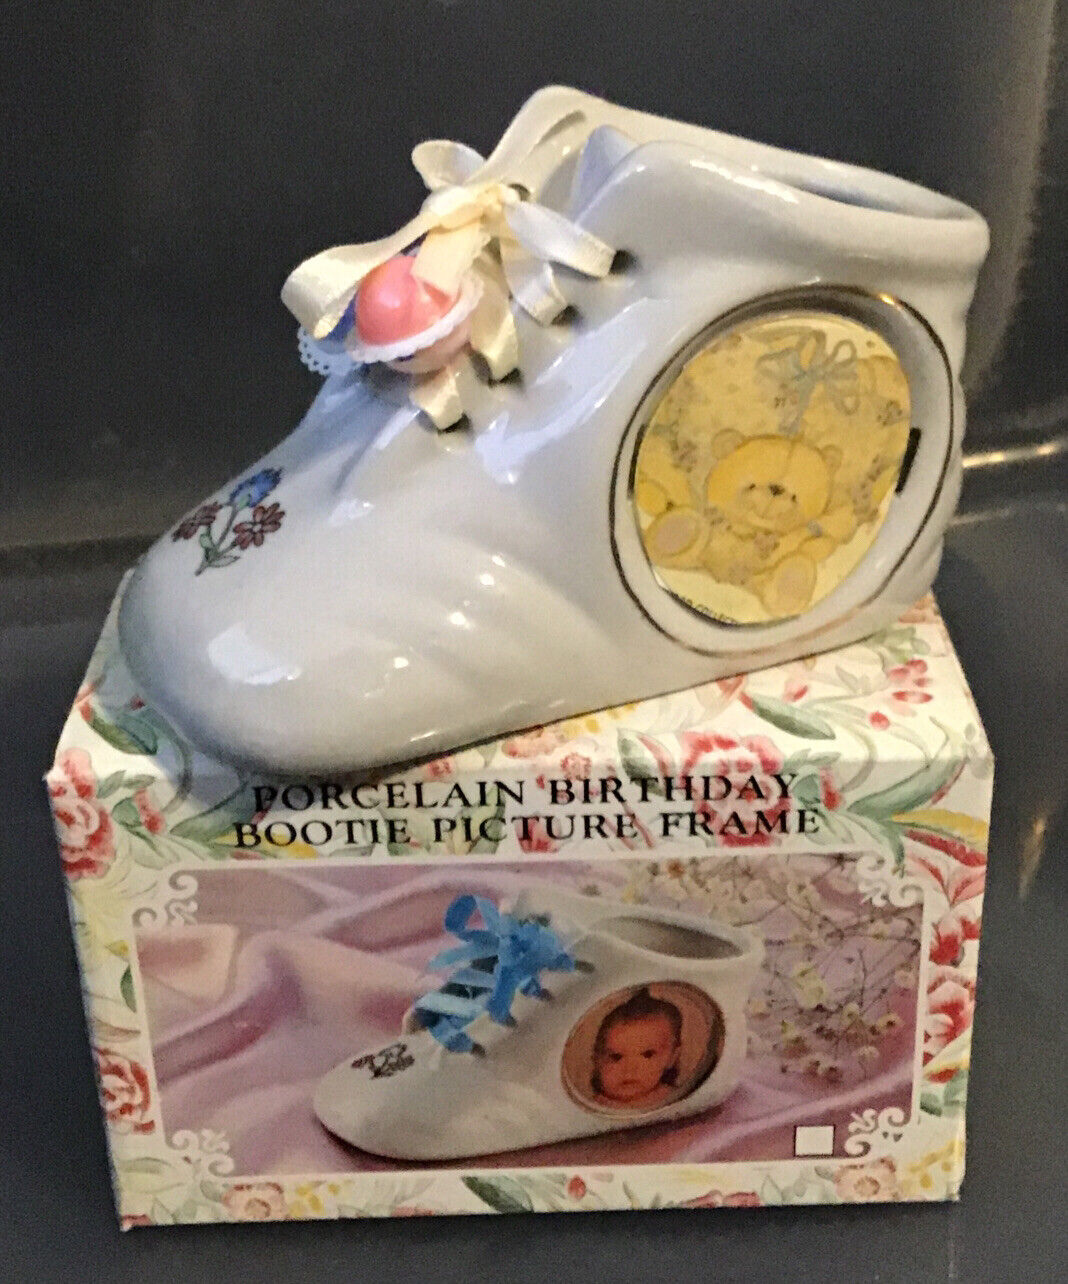 Porcelain Birthday Bootie Picture Frame 5” X 3”  - Holds 2 X 2 Photo